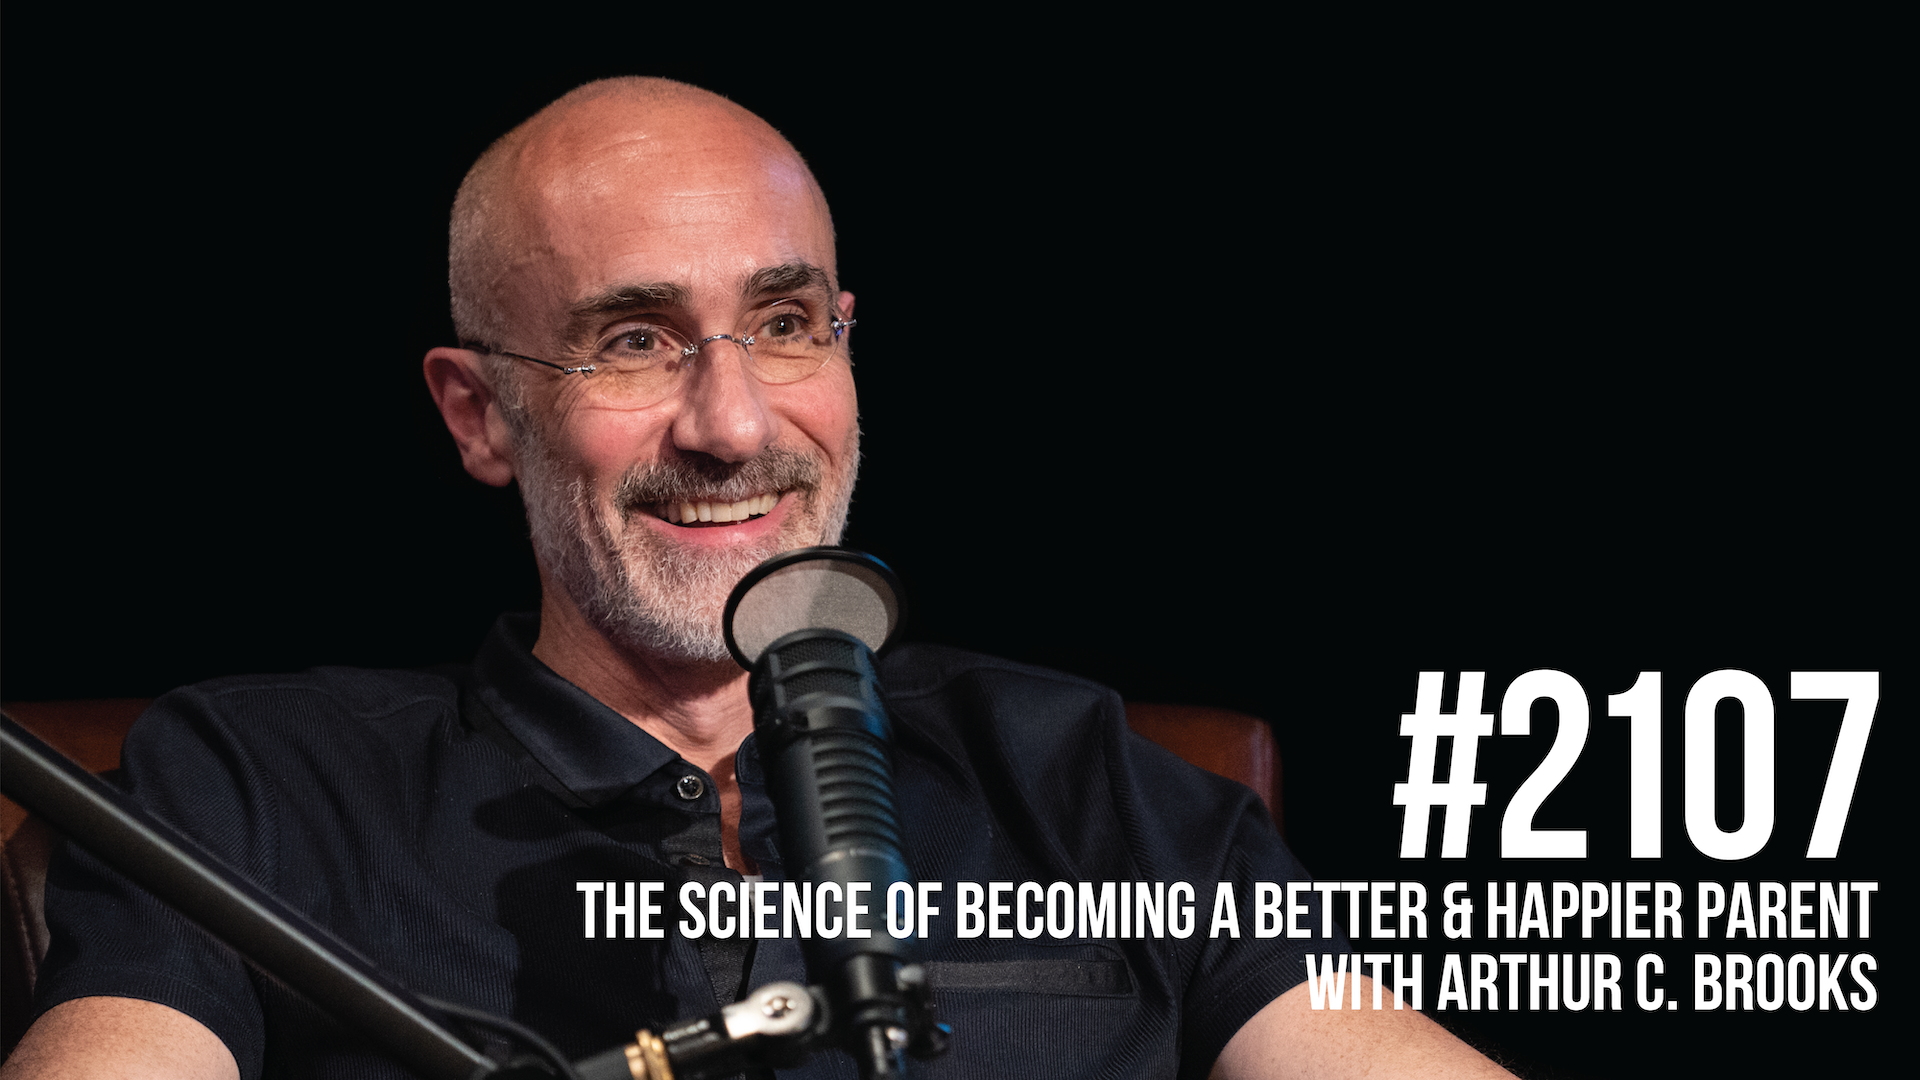 2107: The Science of Becoming a Better & Happier Parent